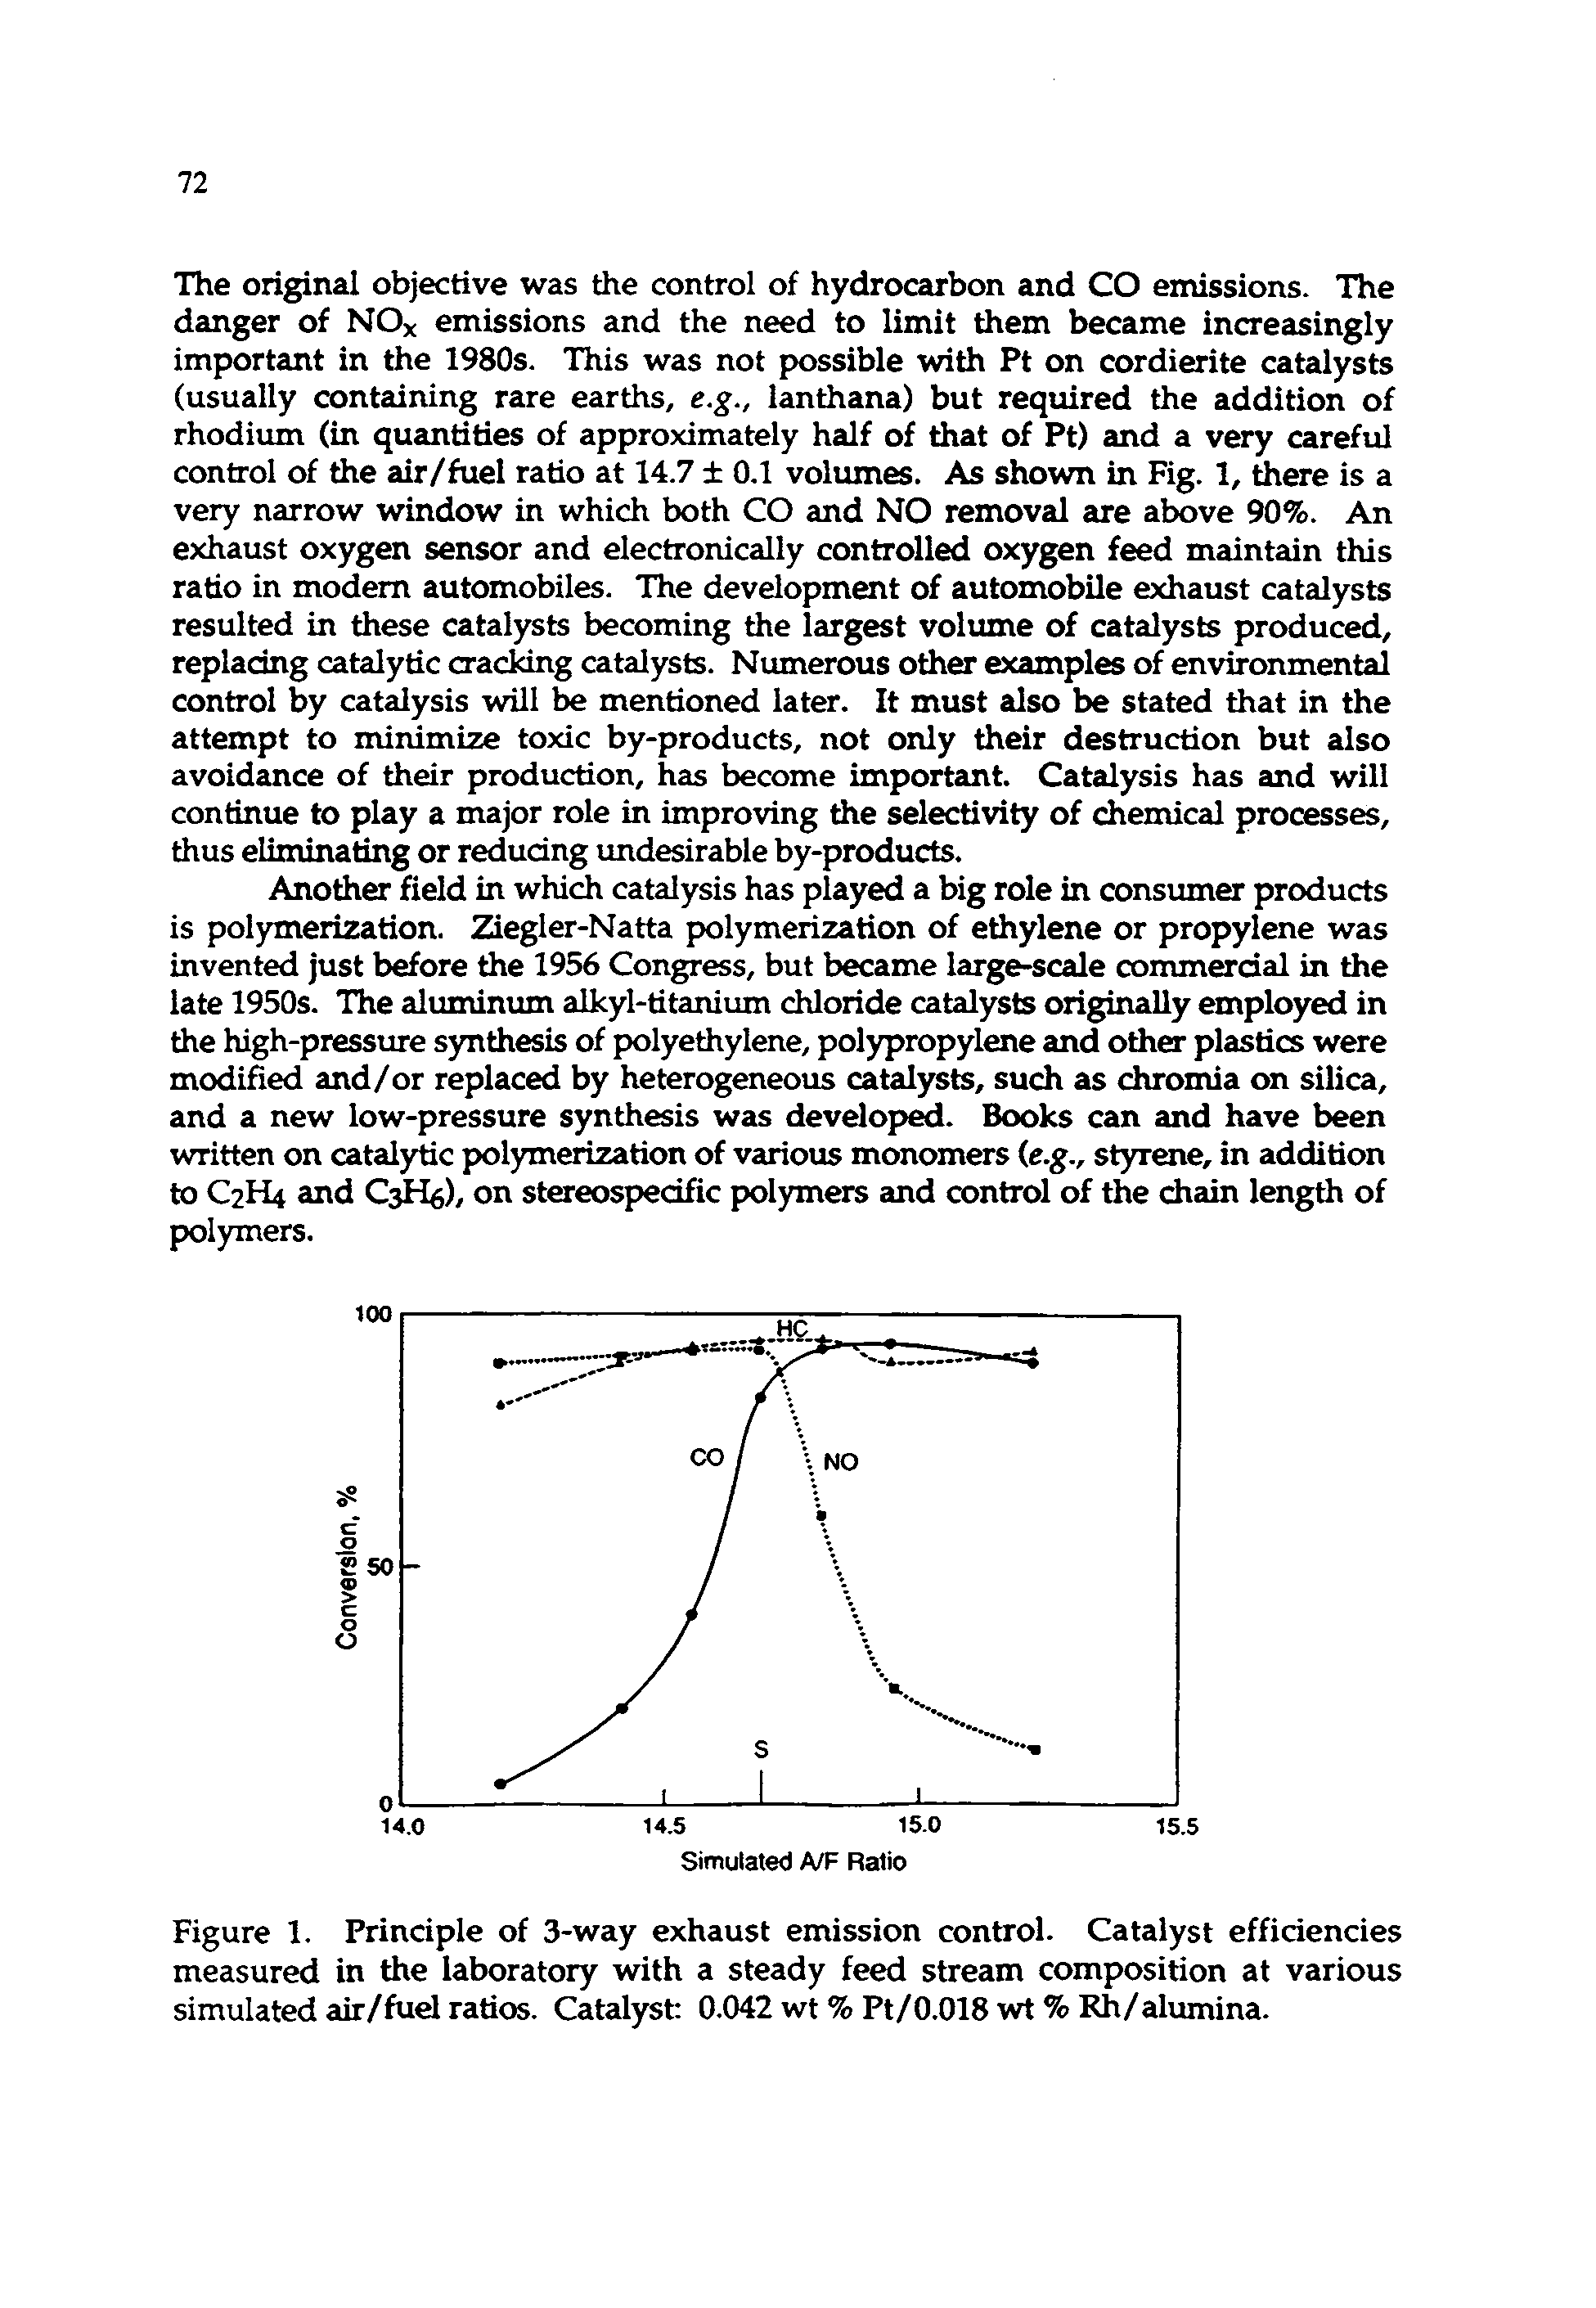 Figure 1. Principle of 3-way exhaust emission control. Catalyst efficiencies measured in the laboratory with a steady feed stream composition at various simulated air/fuel ratios. Catalyst 0.042 wt % Pt/0.018 wt % Kh/alumina.